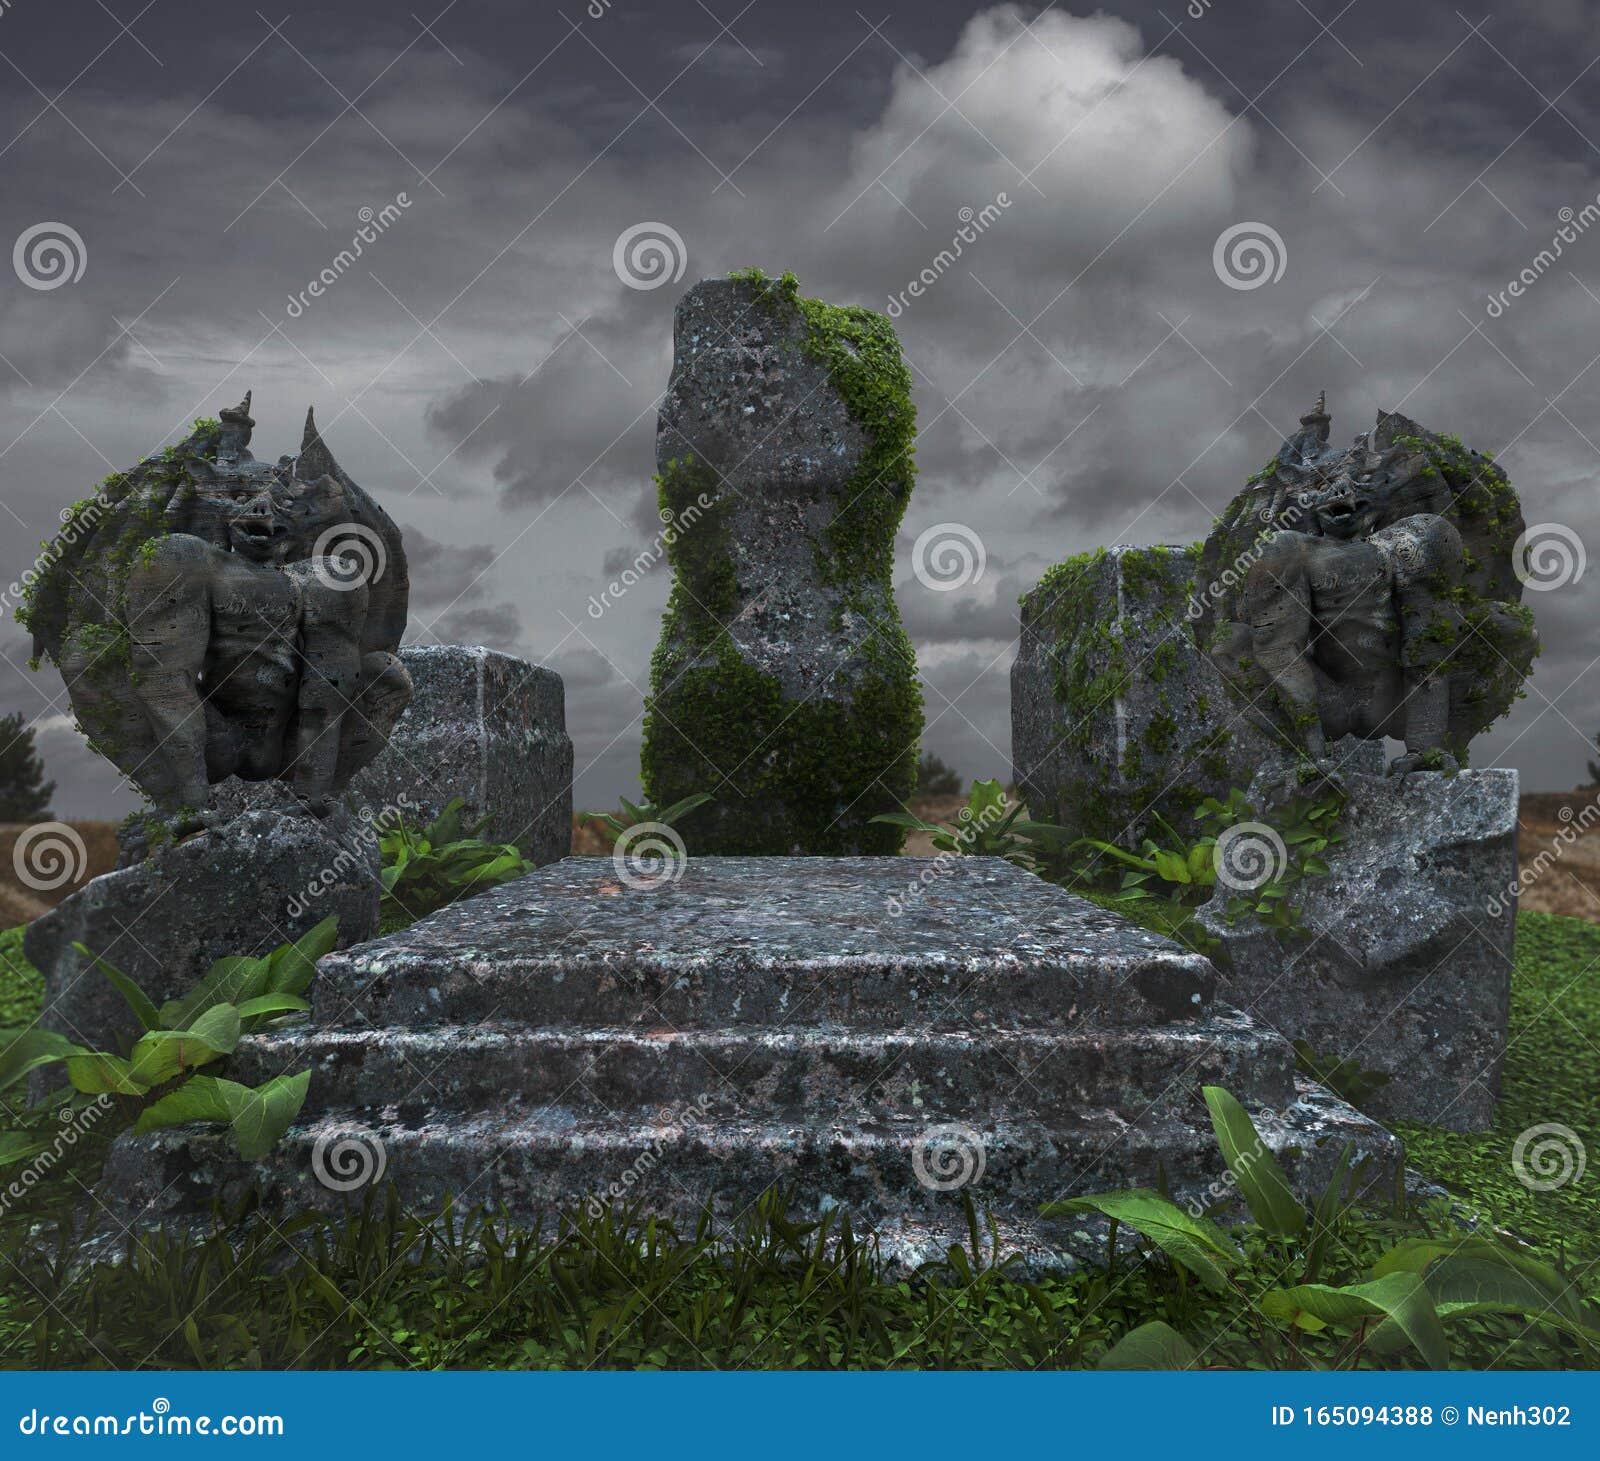 Fantasy Ancient Ruins From A Temple Background Image Stock Illustration Illustration Of Ruins Plants